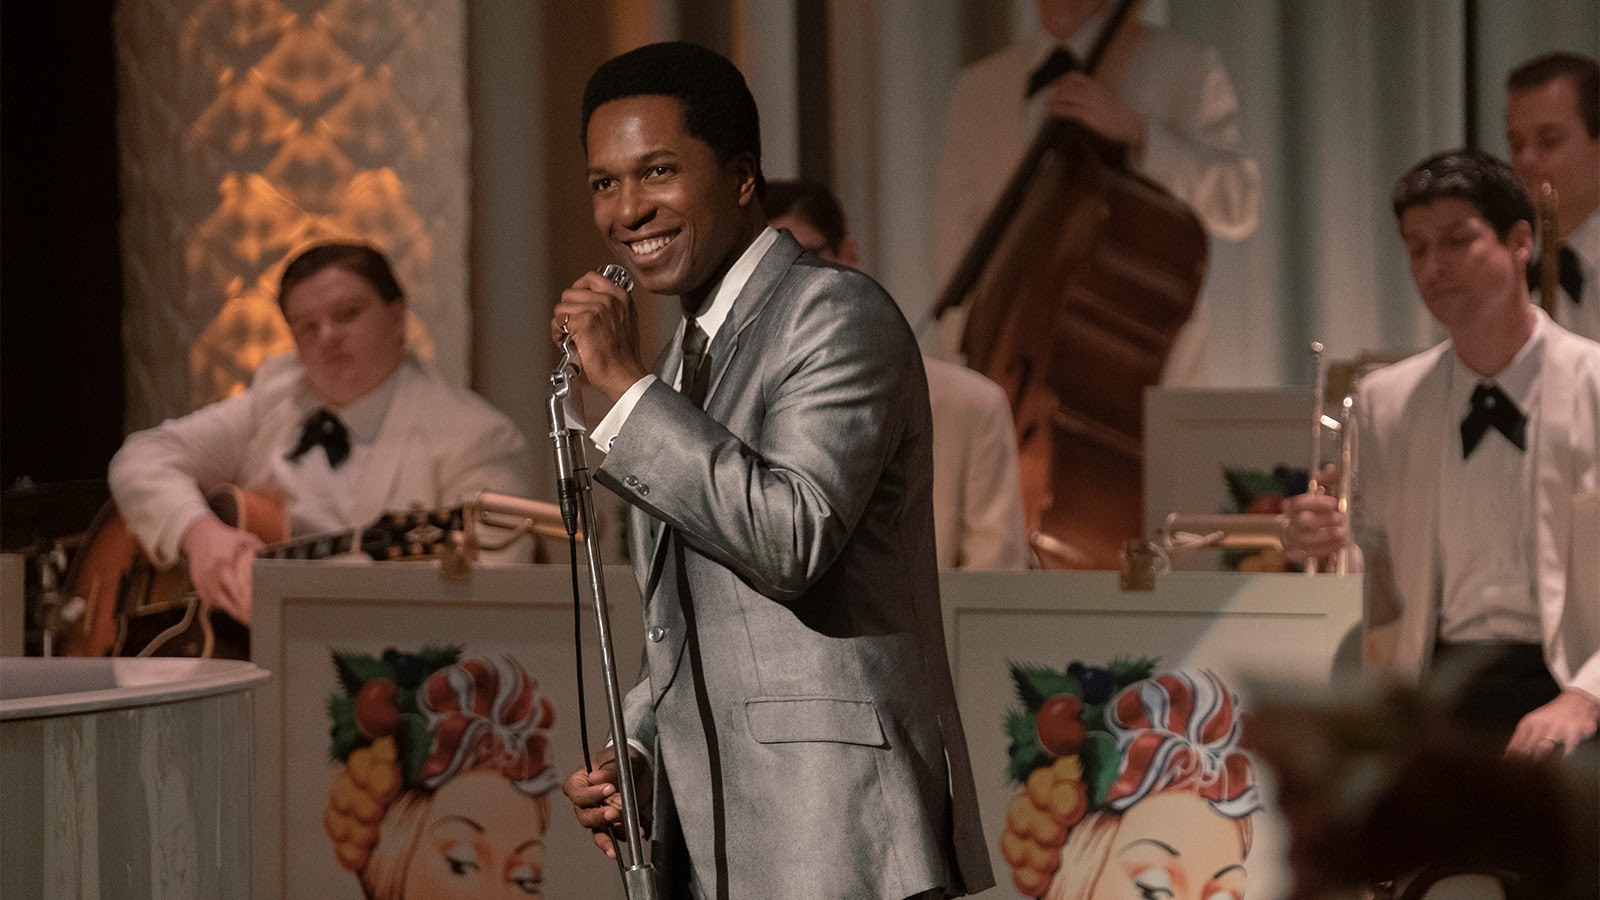 Sam Cooke, played (and sung) by Leslie Odom Jr. in One Night in Miami